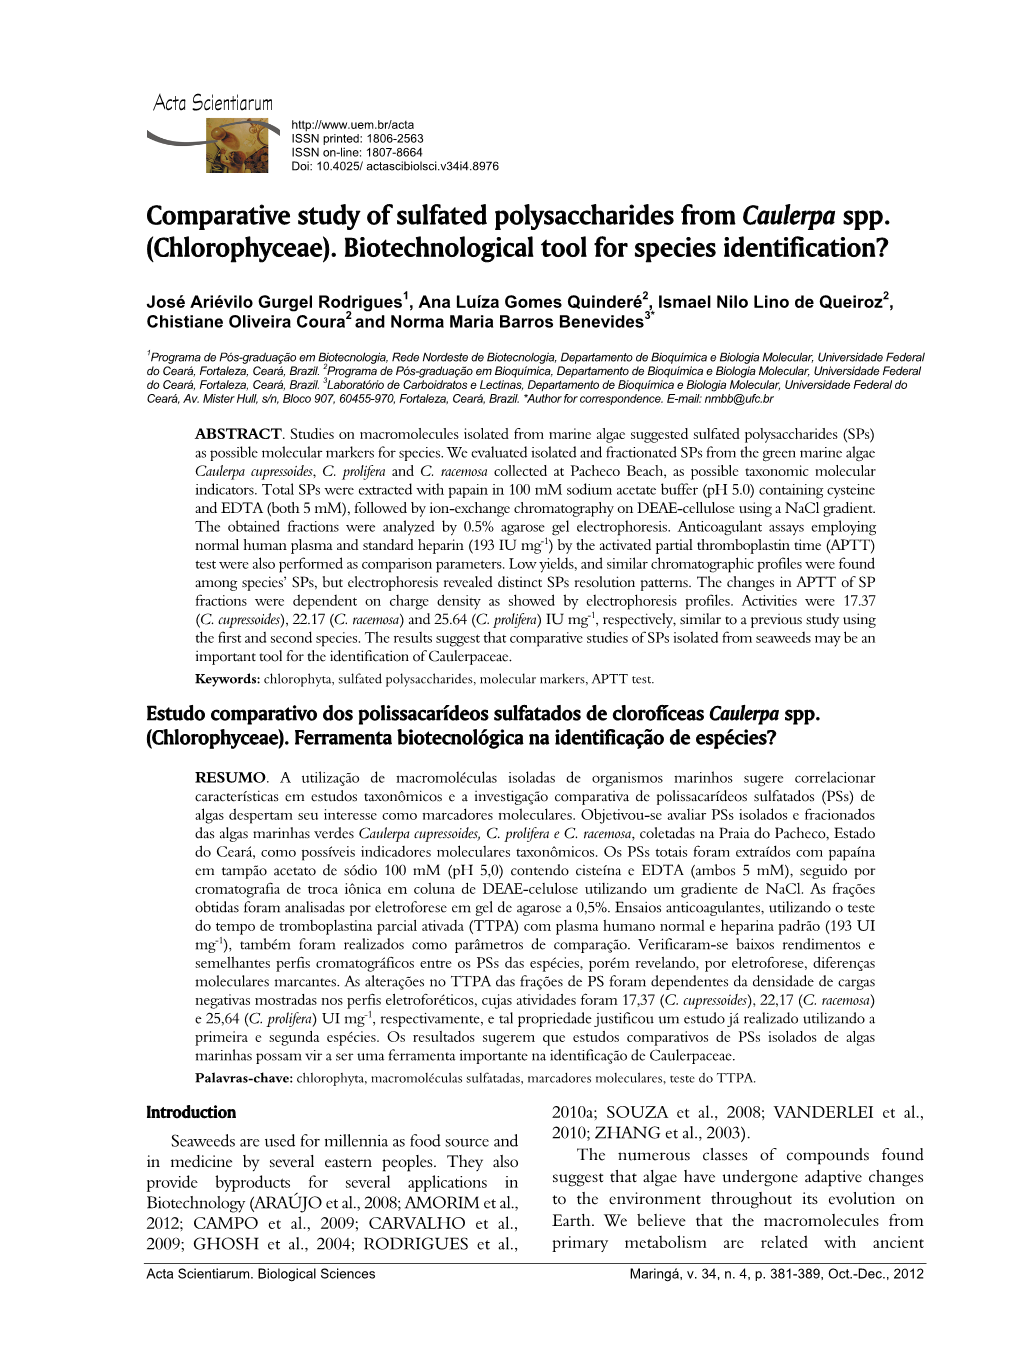 Comparative Study of Sulfated Polysaccharides from Caulerpa Spp